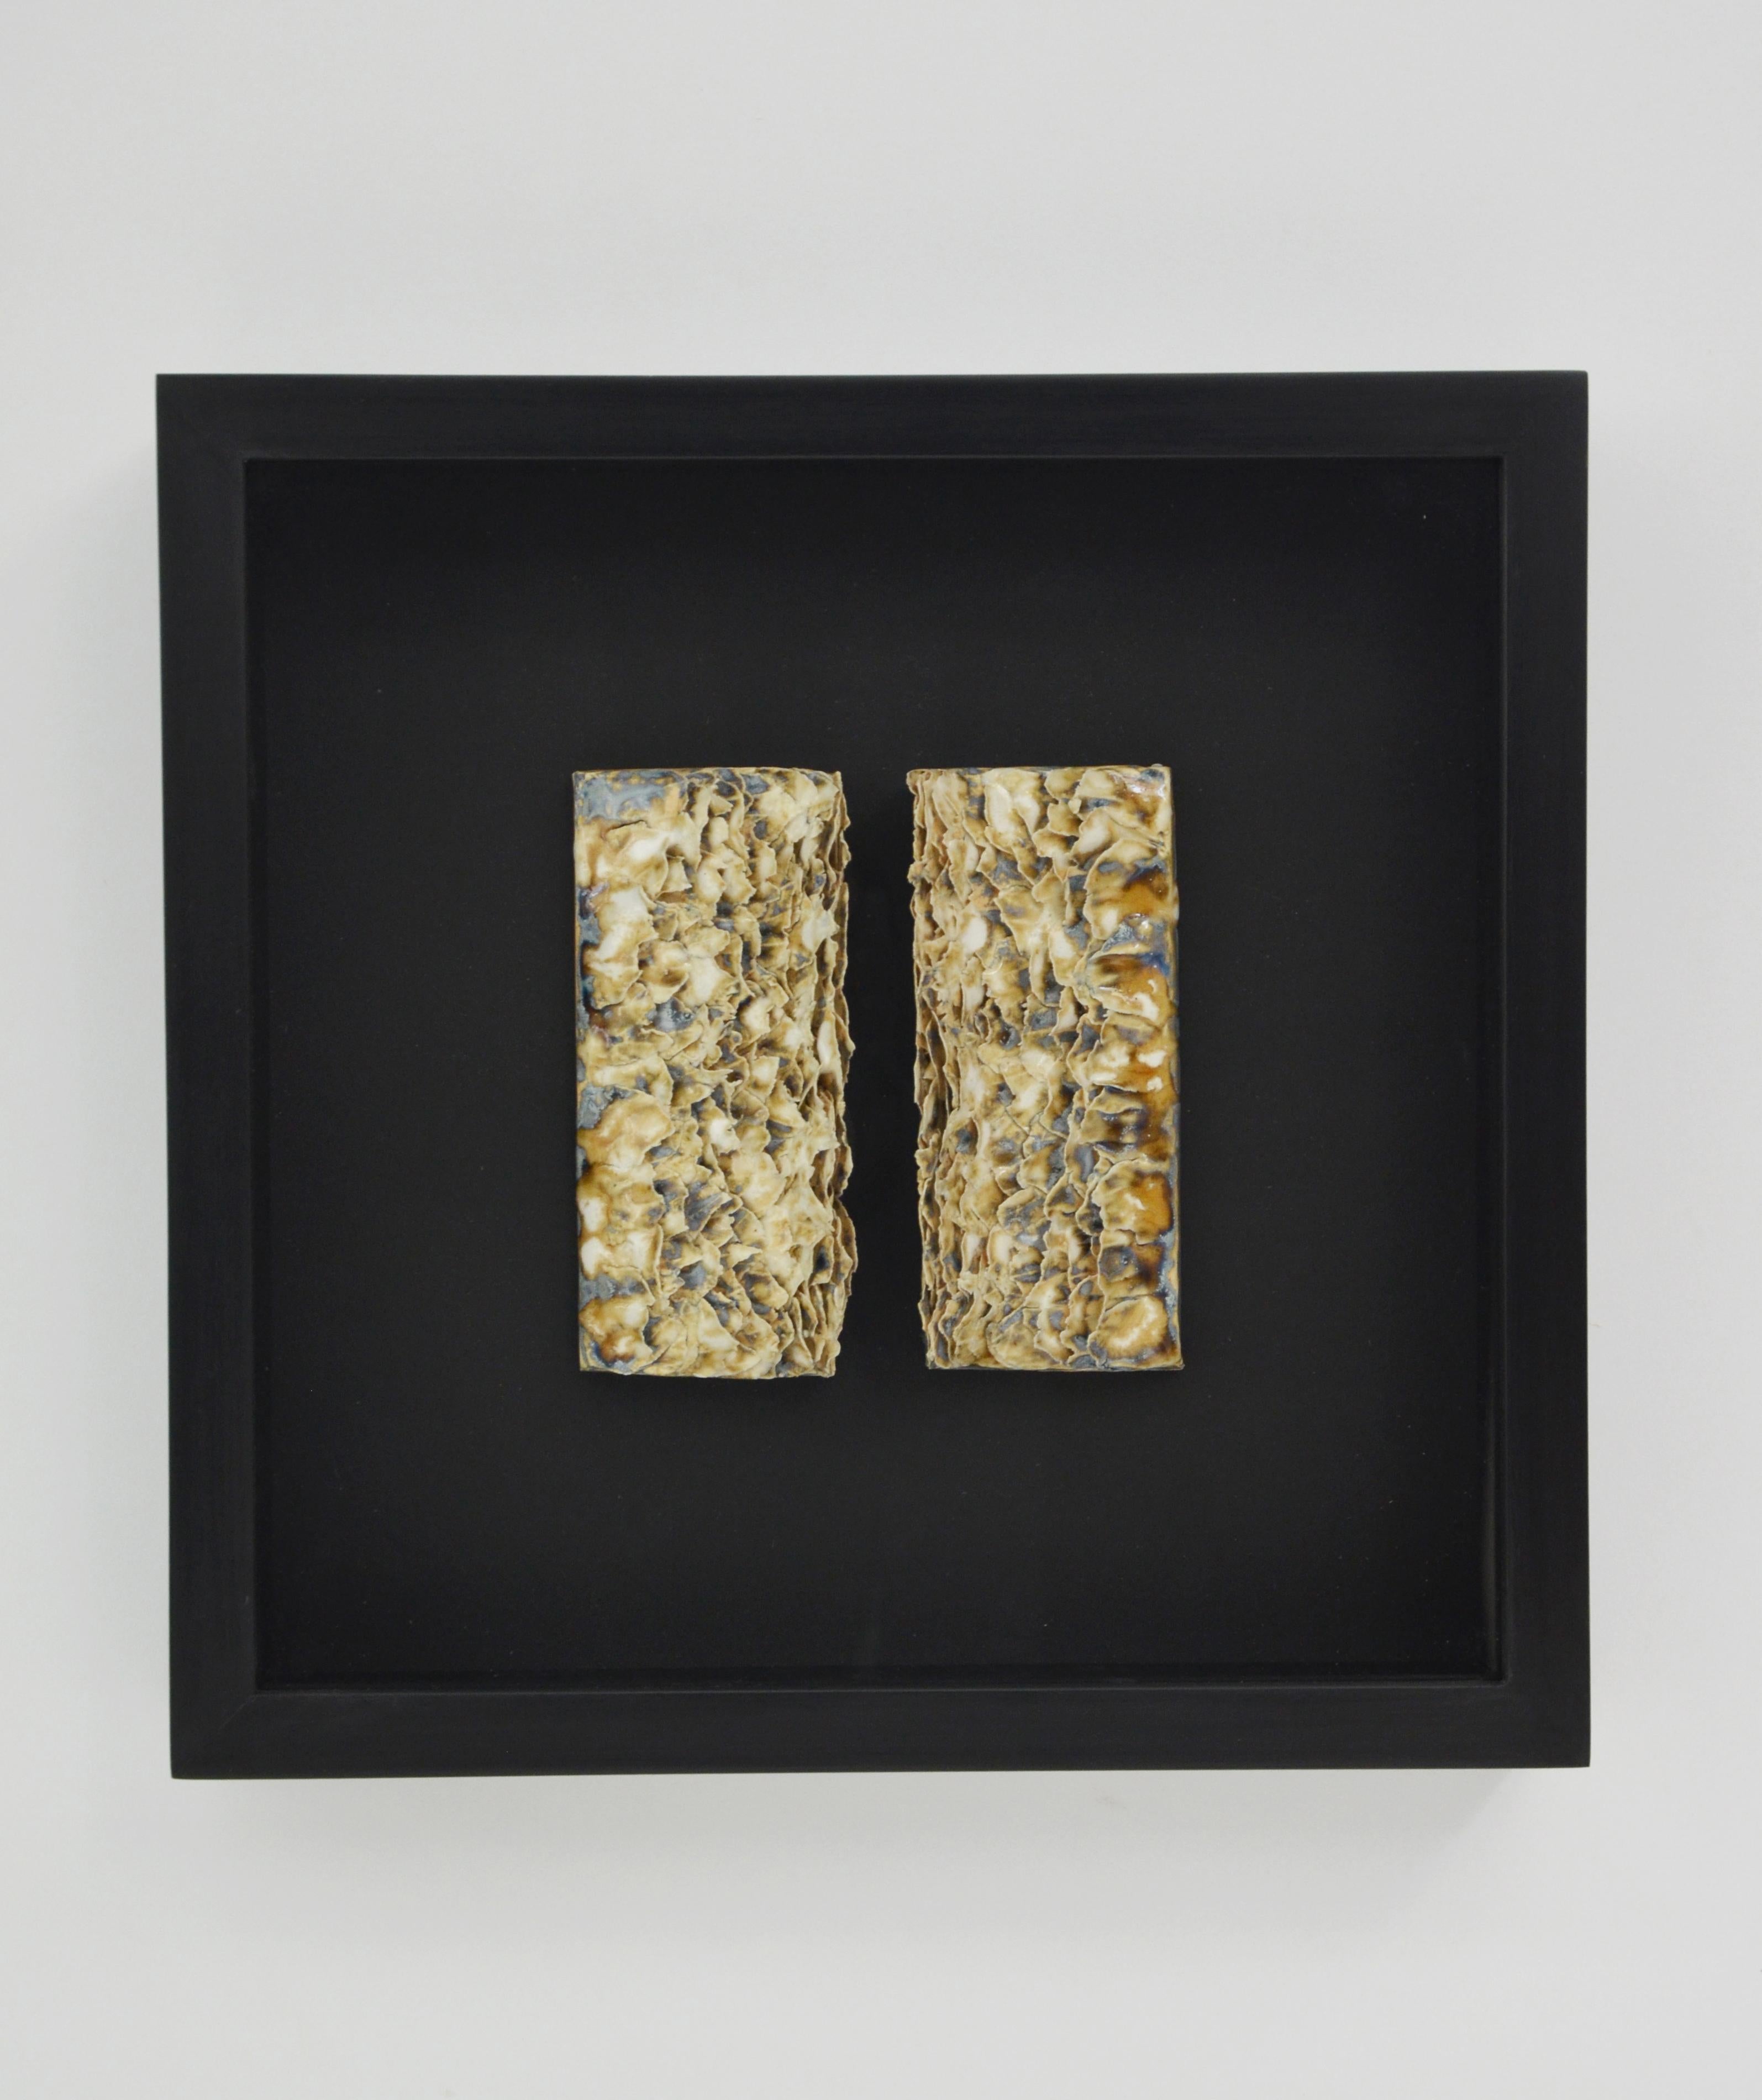 Frag-2 sculpture by Vica Ceramica
Dimensions: D 33 x H 33.5 cm 
Materials: Ceramic, Framed in wood with glass. 
Weight: 2177.4 g

Vica Cerámica-studio is a design and sculpture studio established in Mexico City
Vica's Mexican pottery is